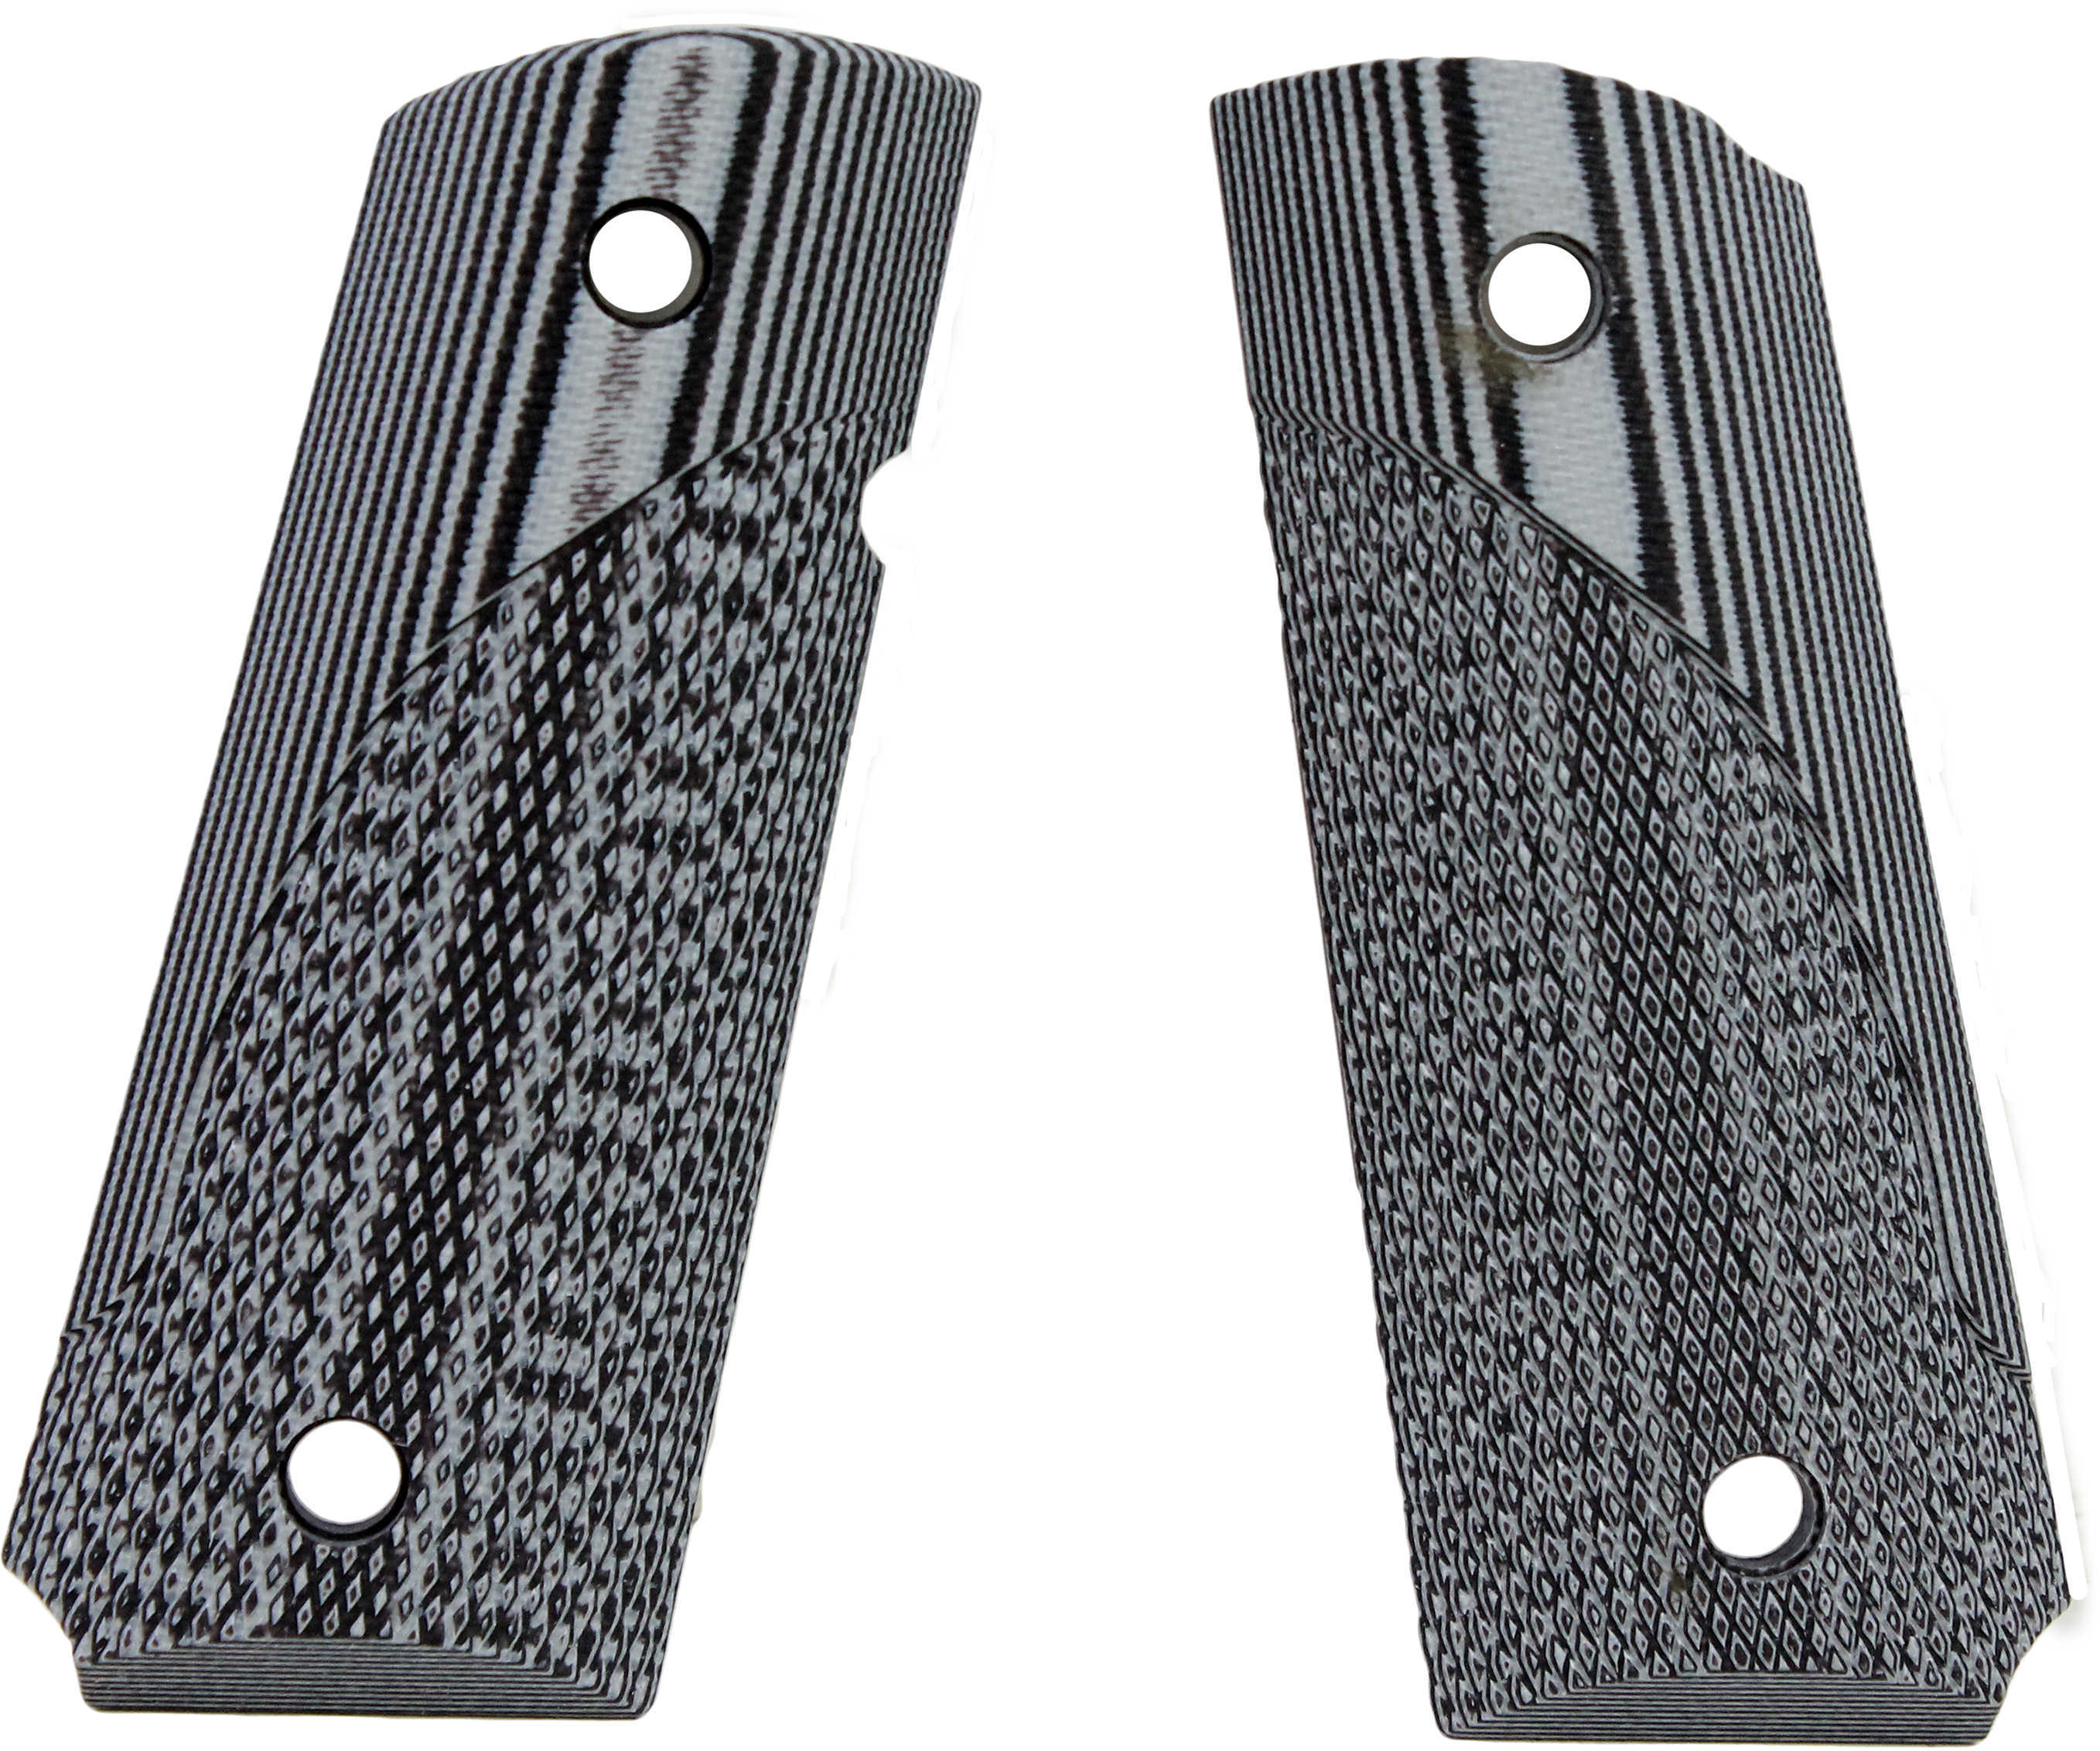 Pachmayr Dominator G10 Grips 1911 Officer Gry/Black Checkered